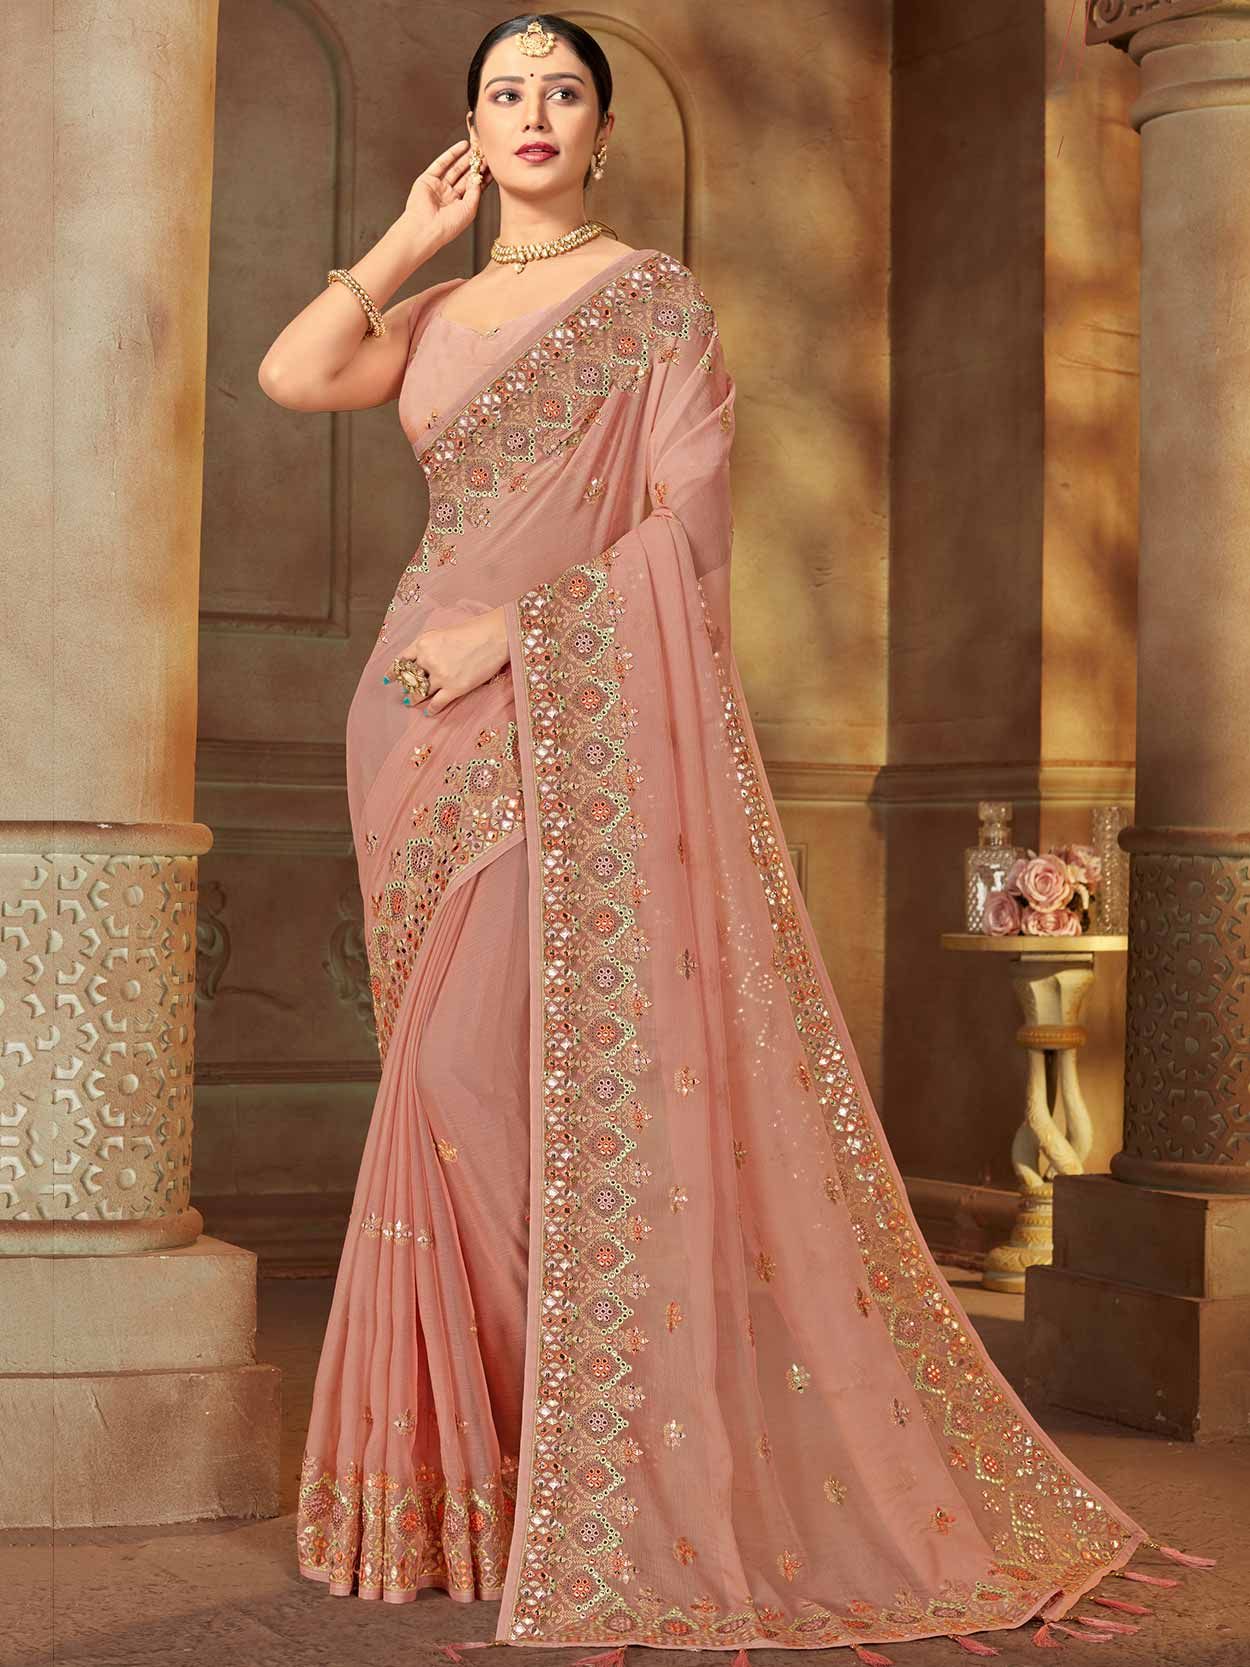 Discover more than 217 chiffon sarees party wear latest